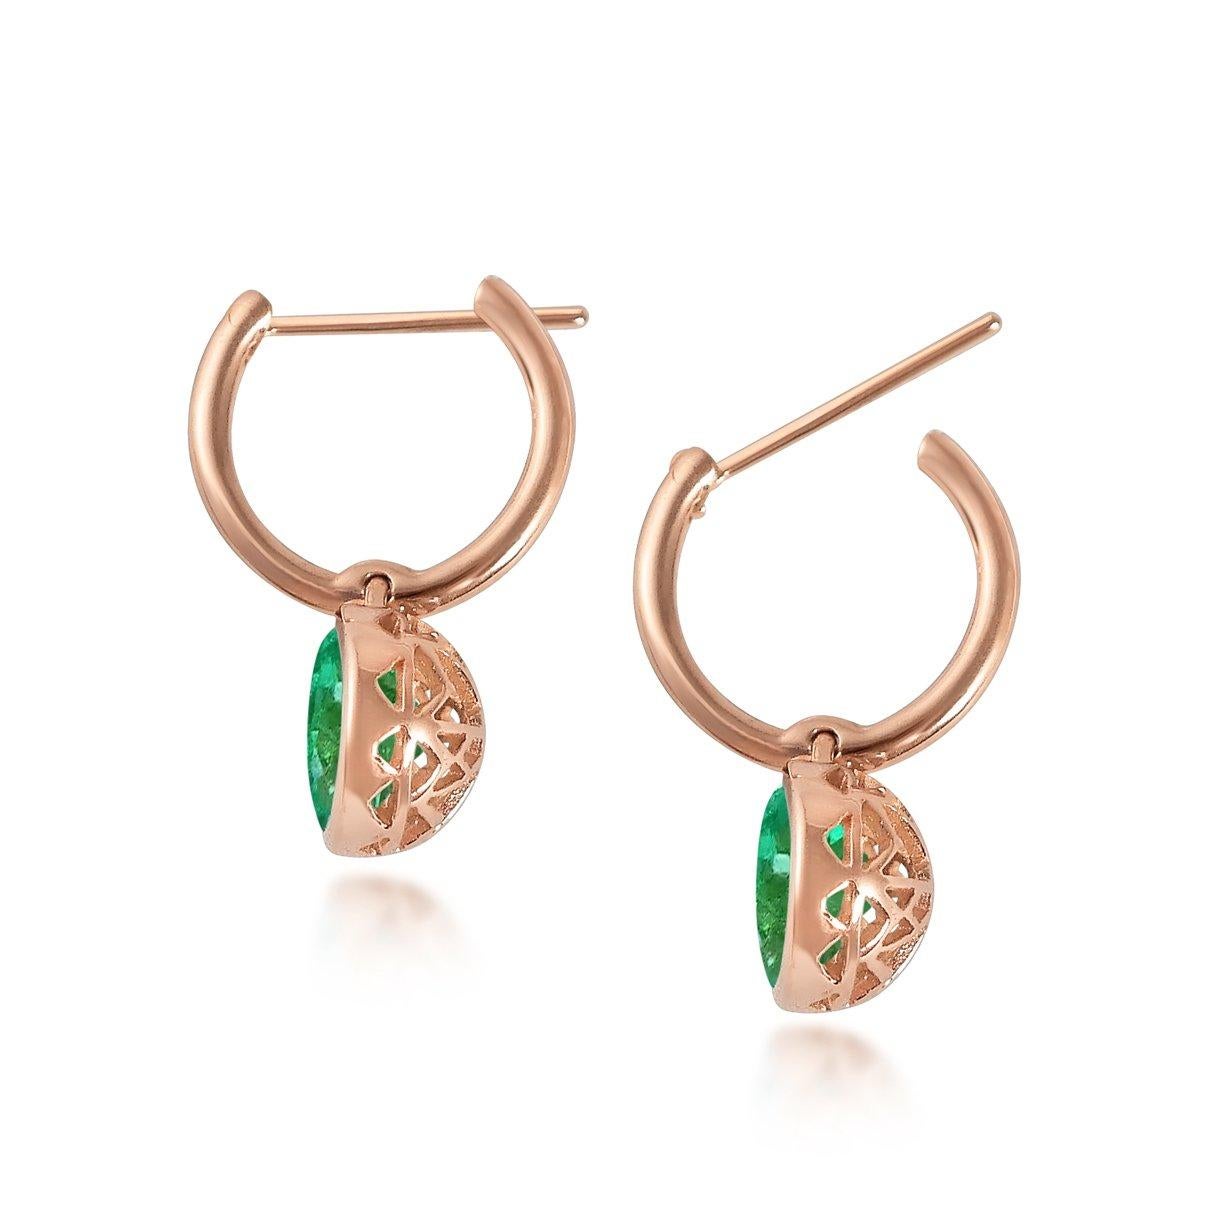 Handcrafted 2.00 Carats Emerald 18 Karat Rose Gold Drop Earrings. The 8mm natural stones are set in our iconic hand pierced gold lace to let the light through. Our precious and fine stones on our dangling earrings are highlighted by a diamond on